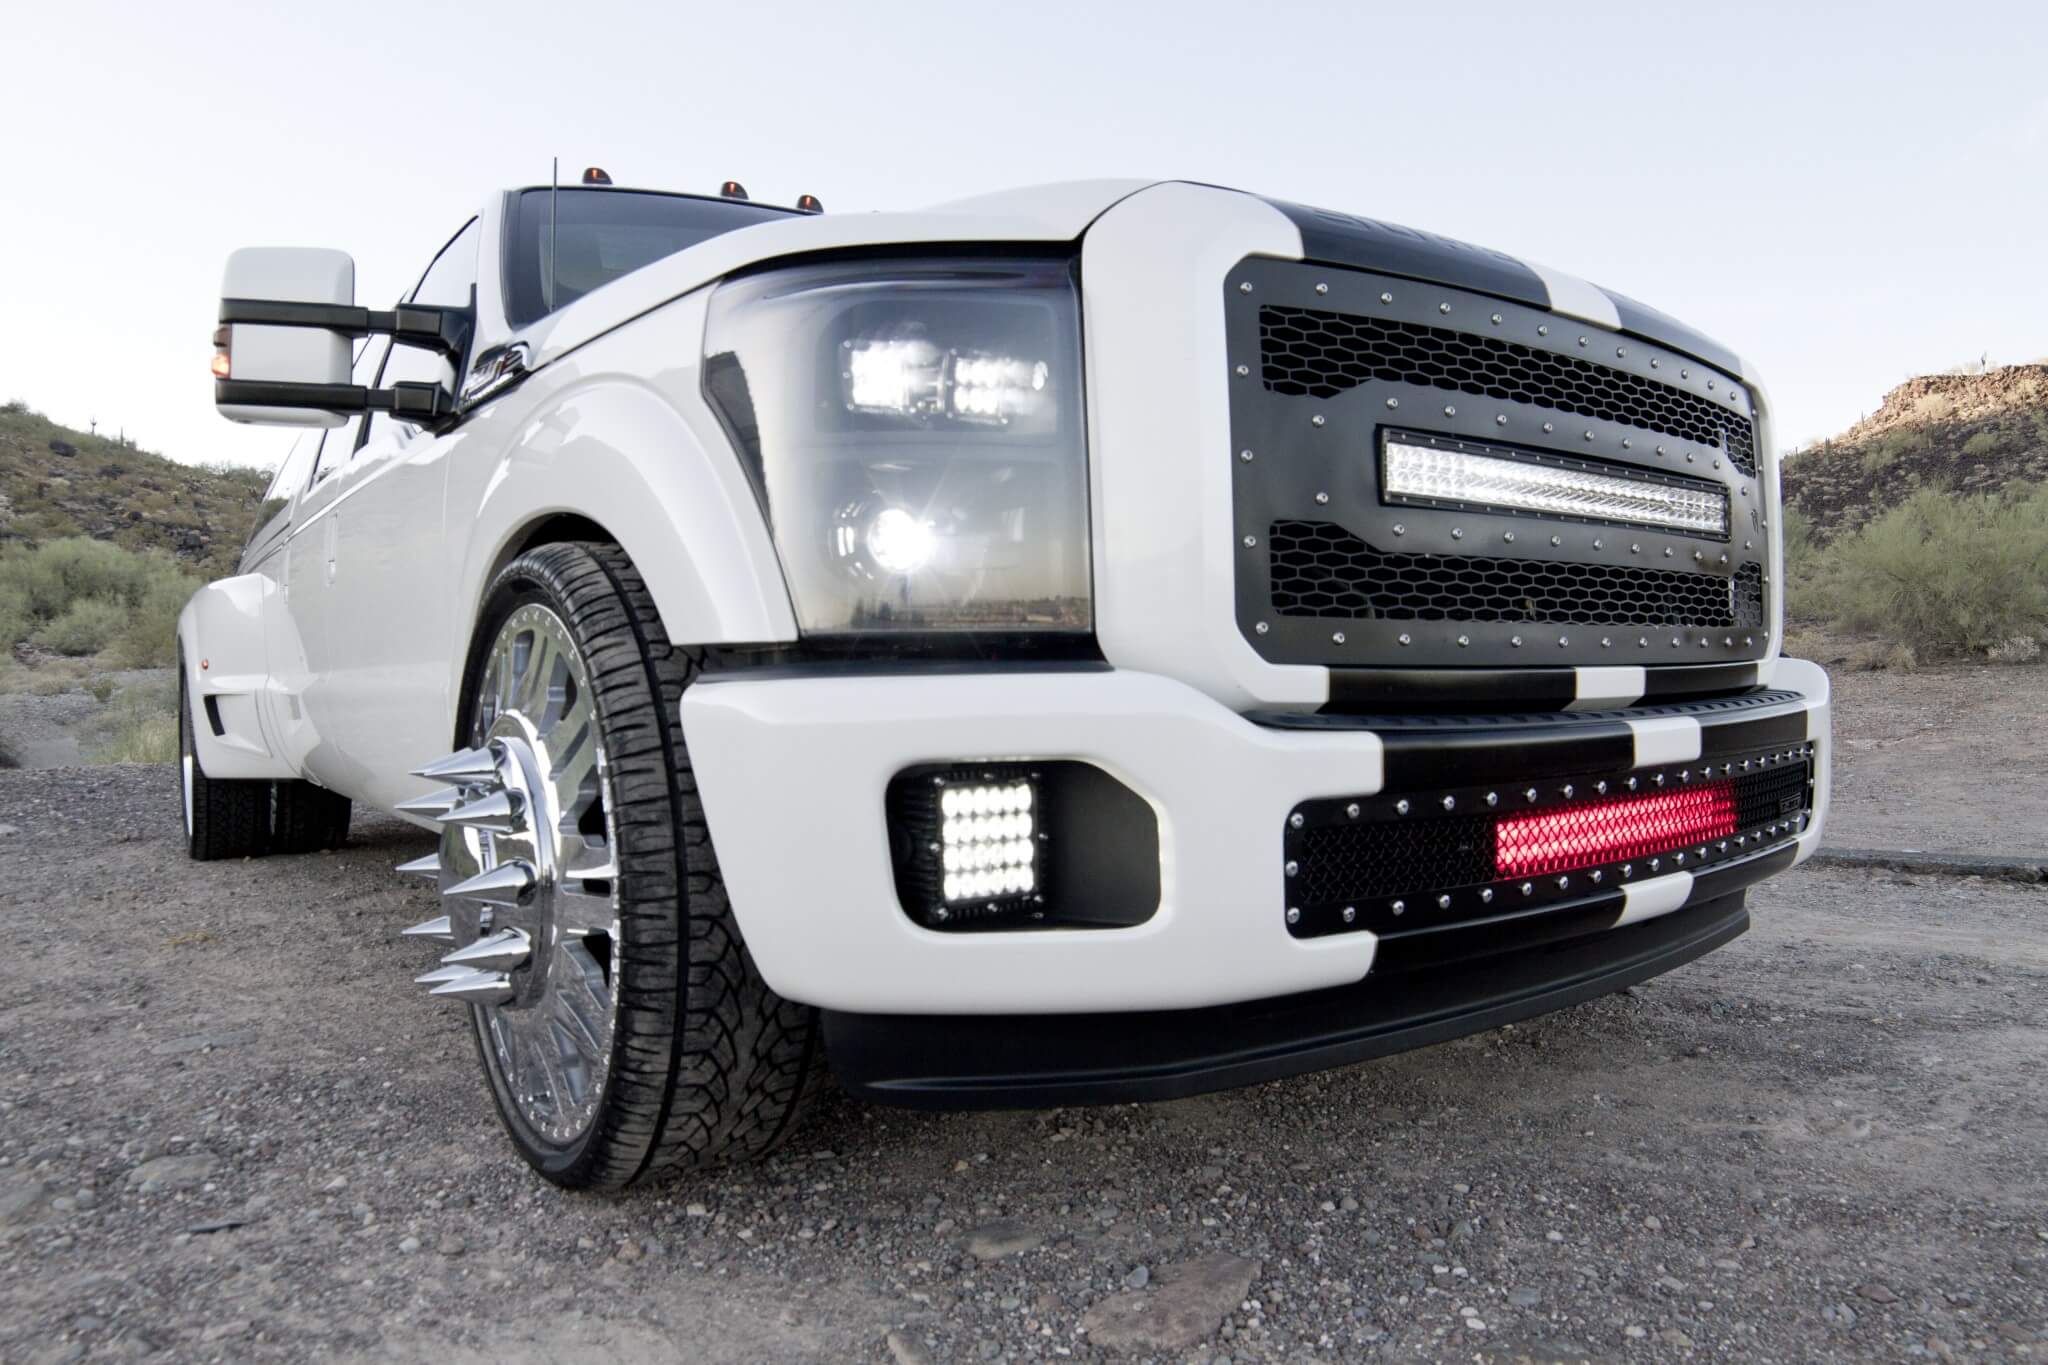 Wherever the road may take Damon, he’ll be able to see clearly ahead with the abundance of Rigid Industries lighting. 